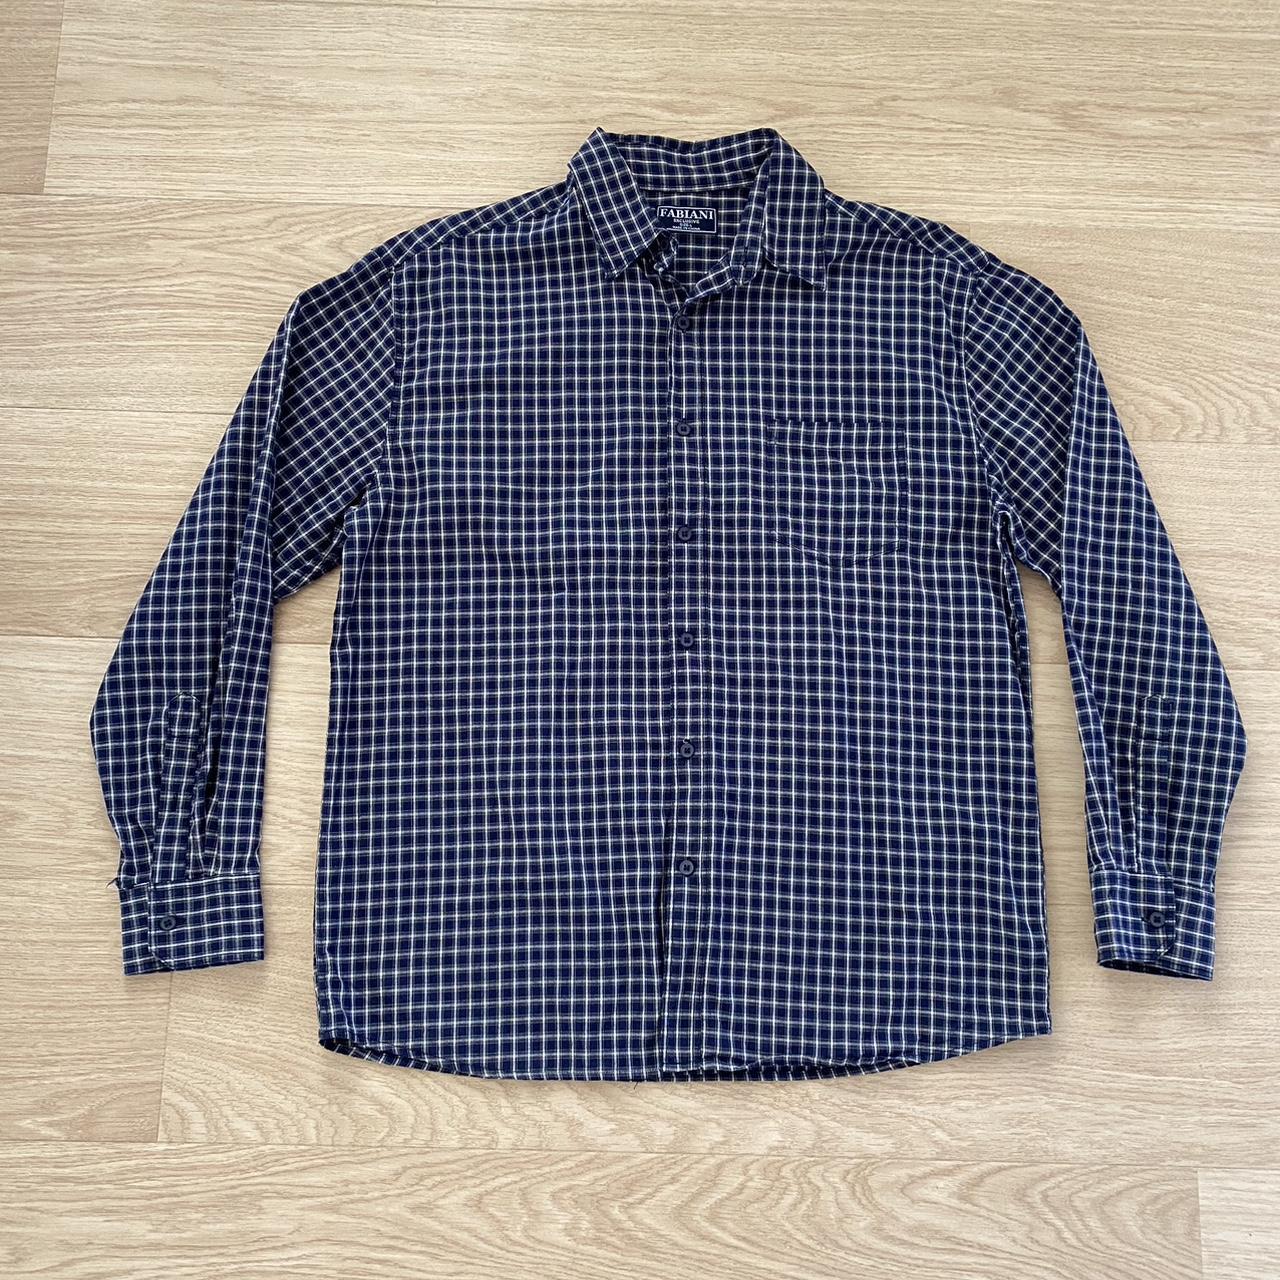 Fabiani Blue check shirt Great condition - hardly... - Depop